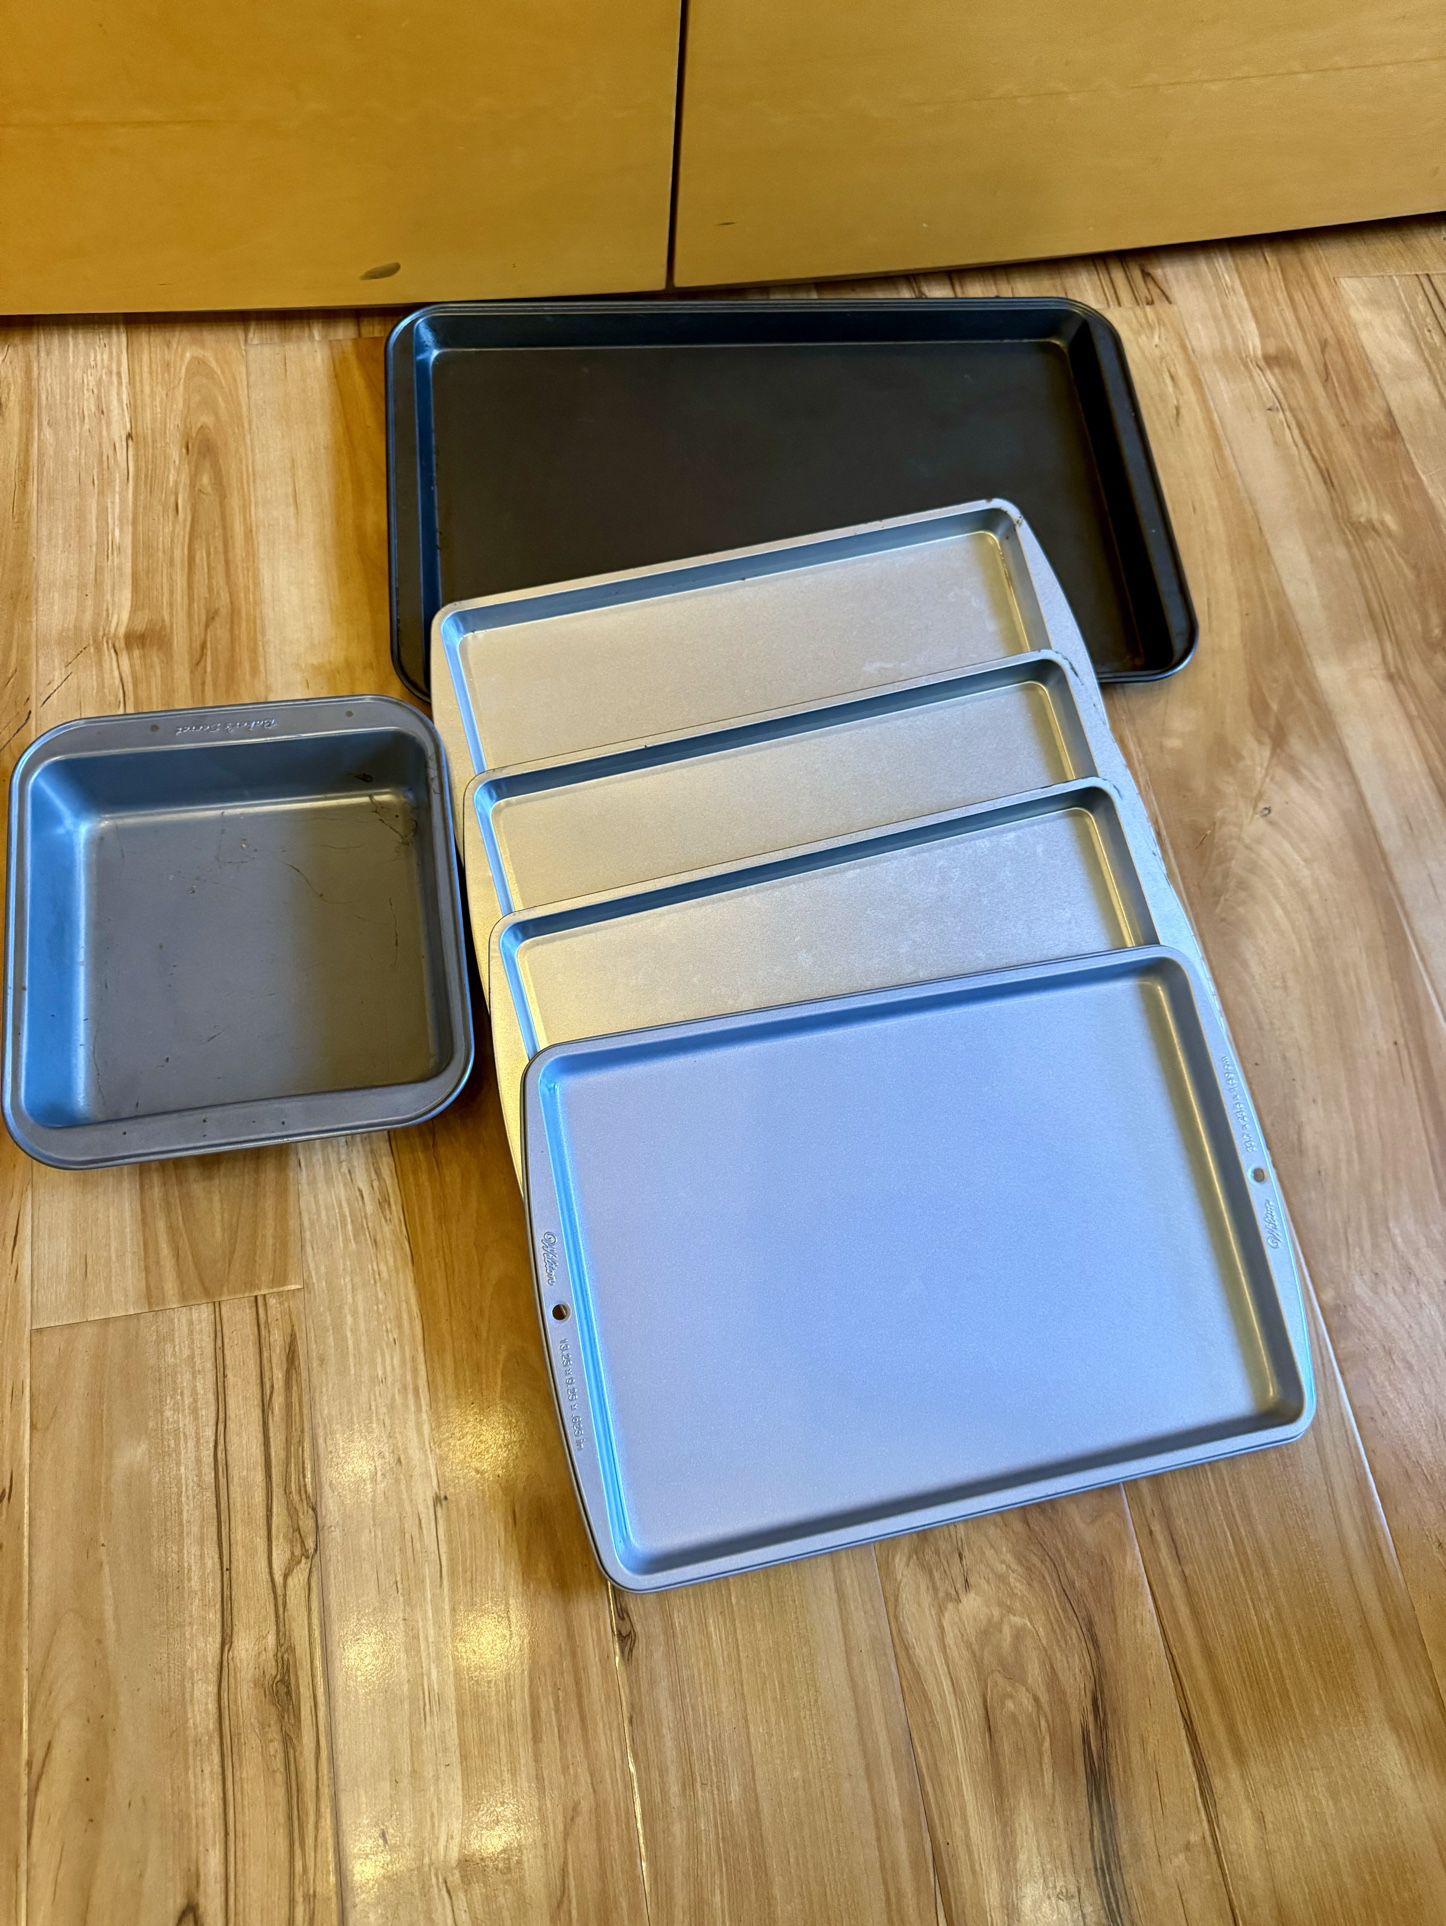 COOKIE SHEETS SET (5) $20